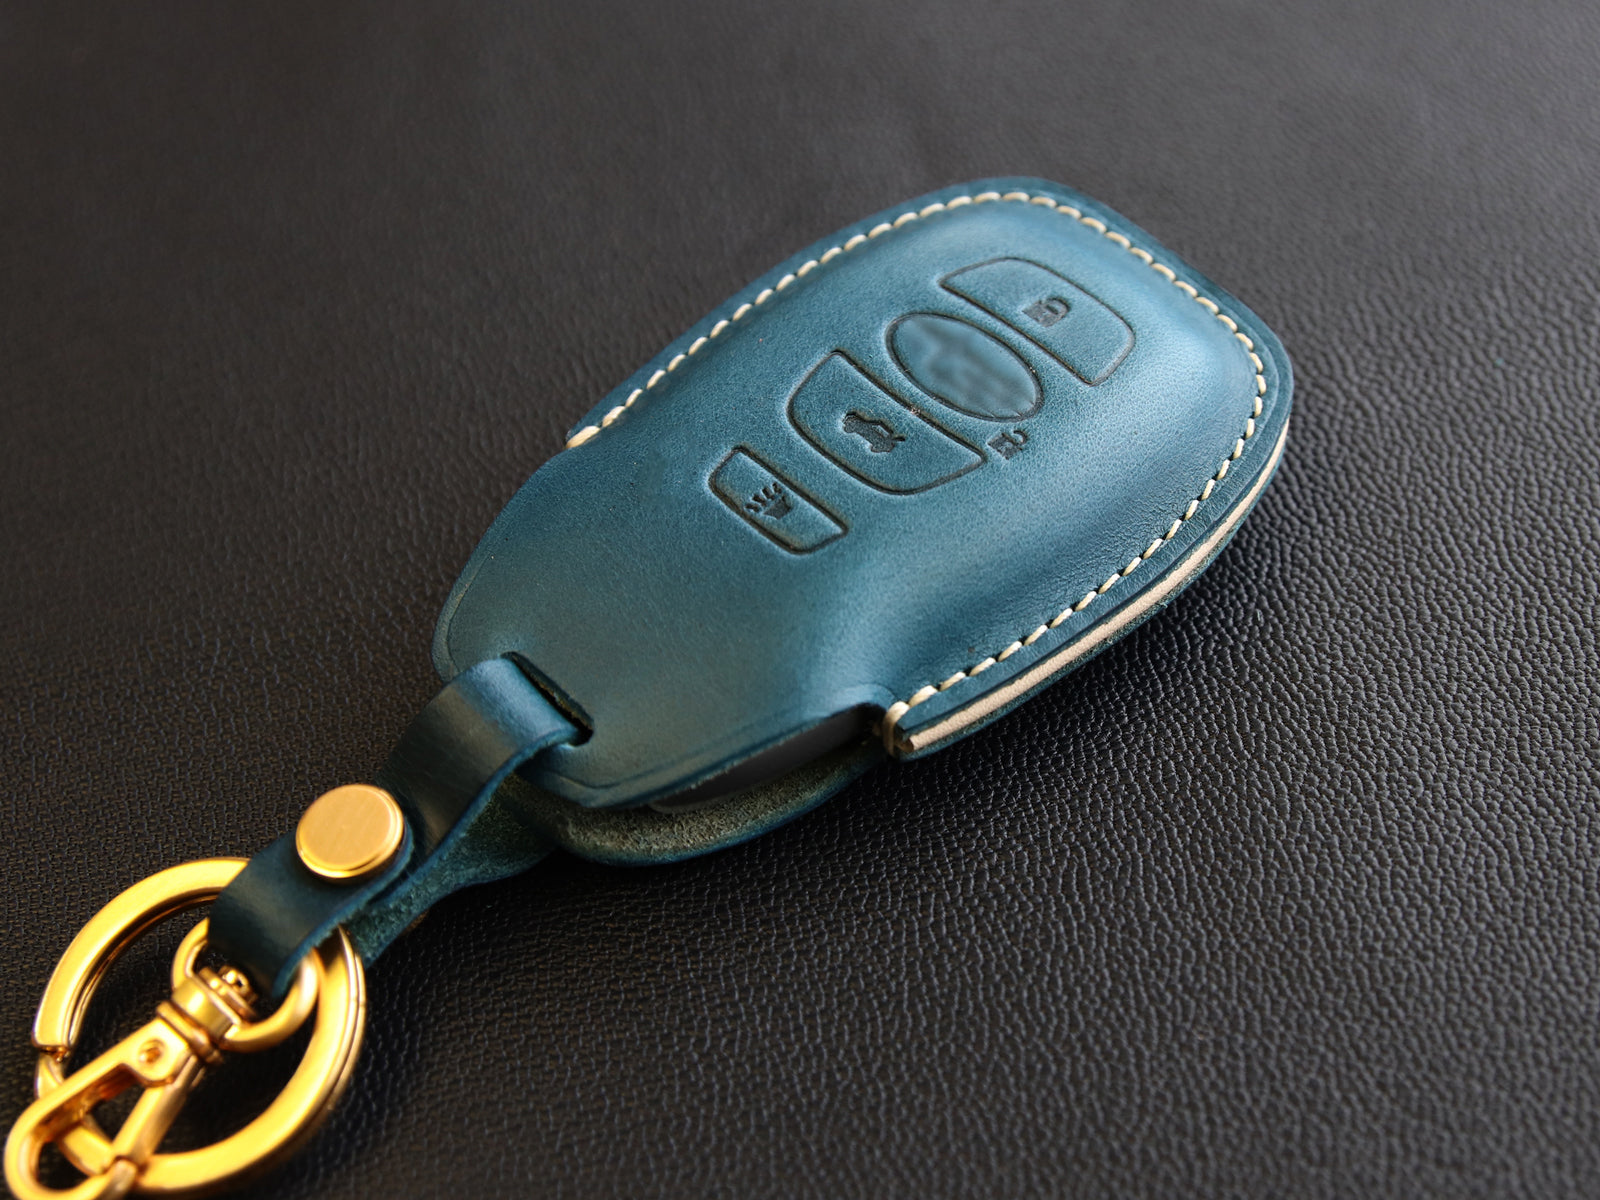  QBUC for Subaru Key Fob Cover Case with Genuine Leather  Keychain for Subaru Forester CrossTrek Ascent Outback Legacy WRX etc (Blue)  : Automotive